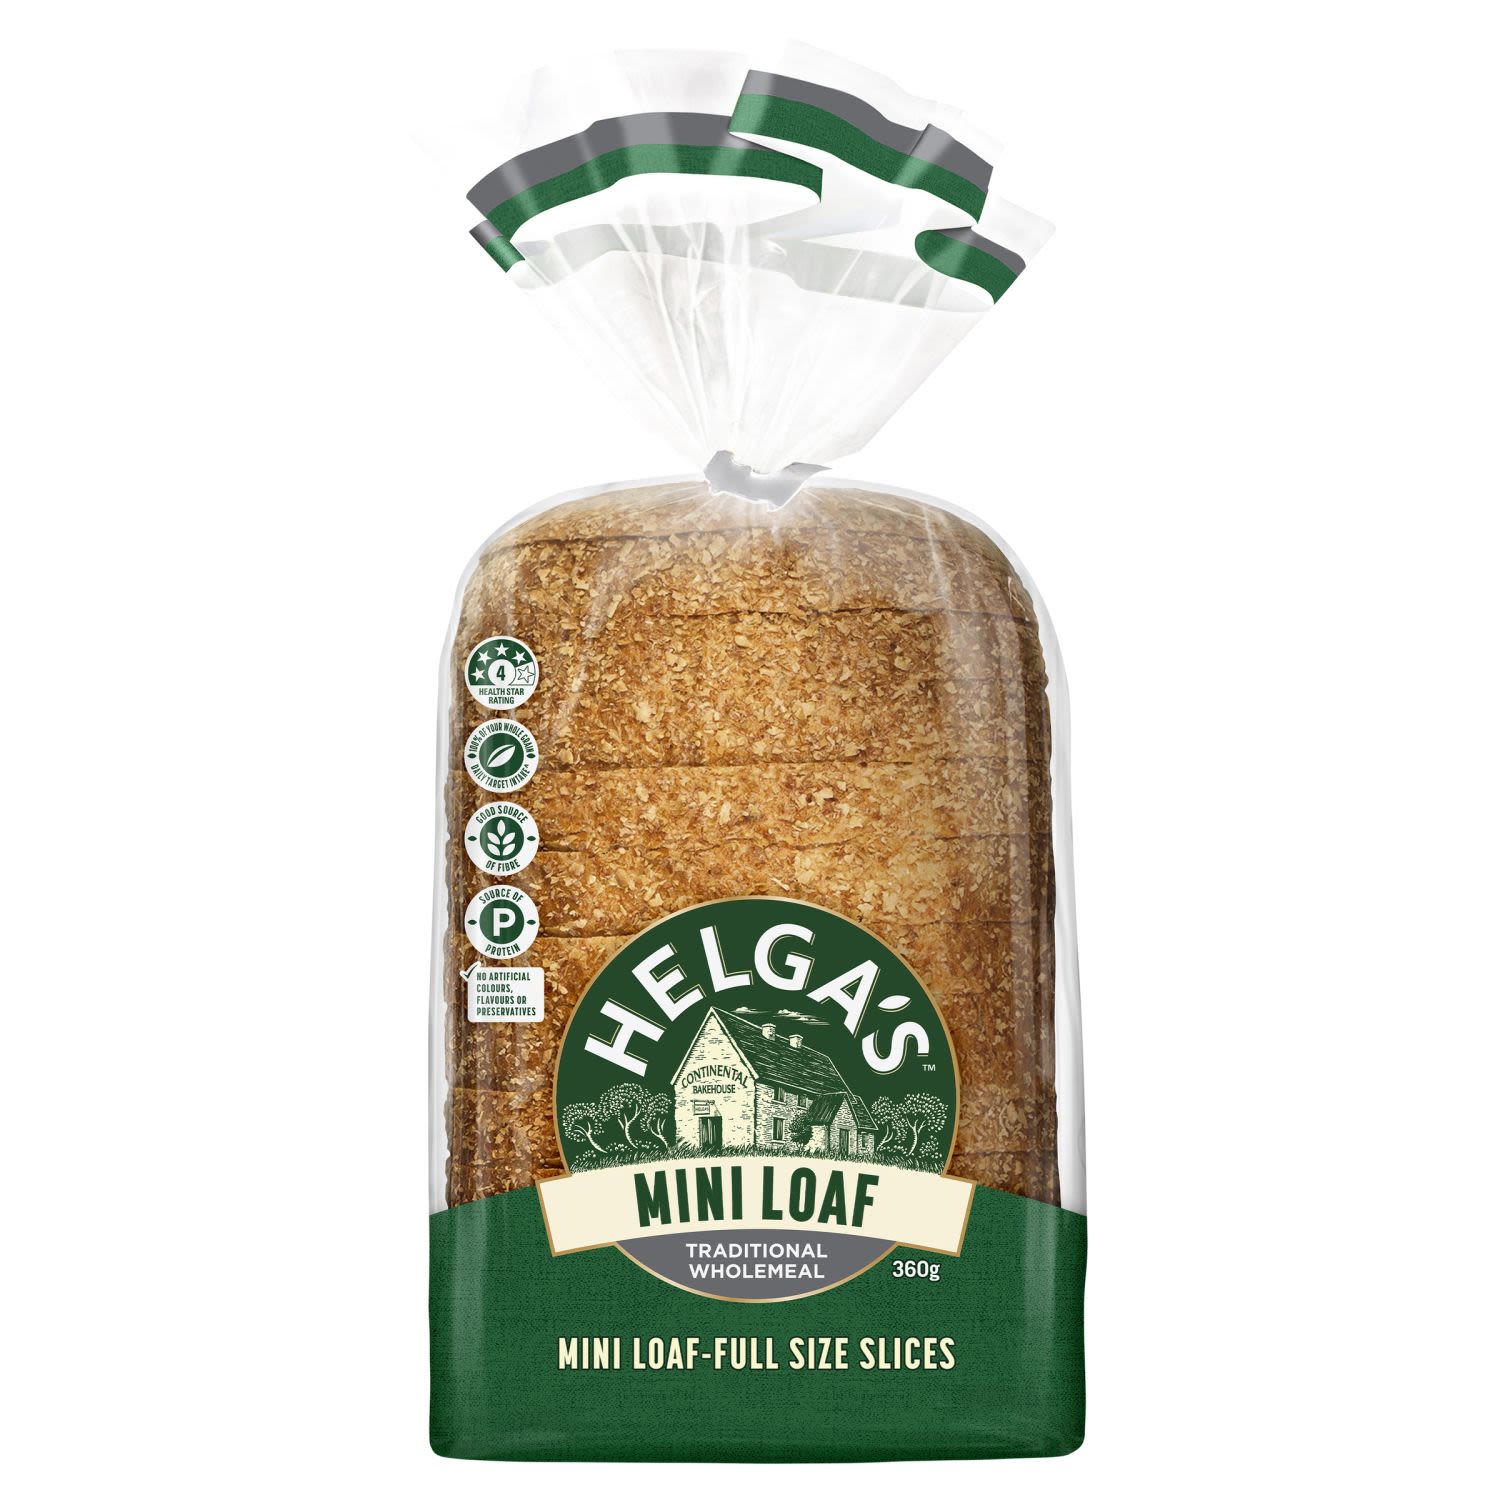 Baked fresh with no artificial colours, flavours and preservatives, Helga's Traditional Wholemeal Sliced Bread Mini Loaf is perfect for all your sandwich needs. It contains fibre and protein and with tons of ways to serve, you'll always have something new to enjoy. Create a meaty sandwich, toast and squeeze your favourite spread on top or for a filling breakfast, layer it with eggs, avocado and tomatoes.<br /> <br /> <br /><br />Allergen: Gluten Containing Cereals| Soy<br />Allergen may be present: Soy|Gluten Containing Cereals <br /><br />Country of Origin: Made in Australia from at least 90% Australian ingredients